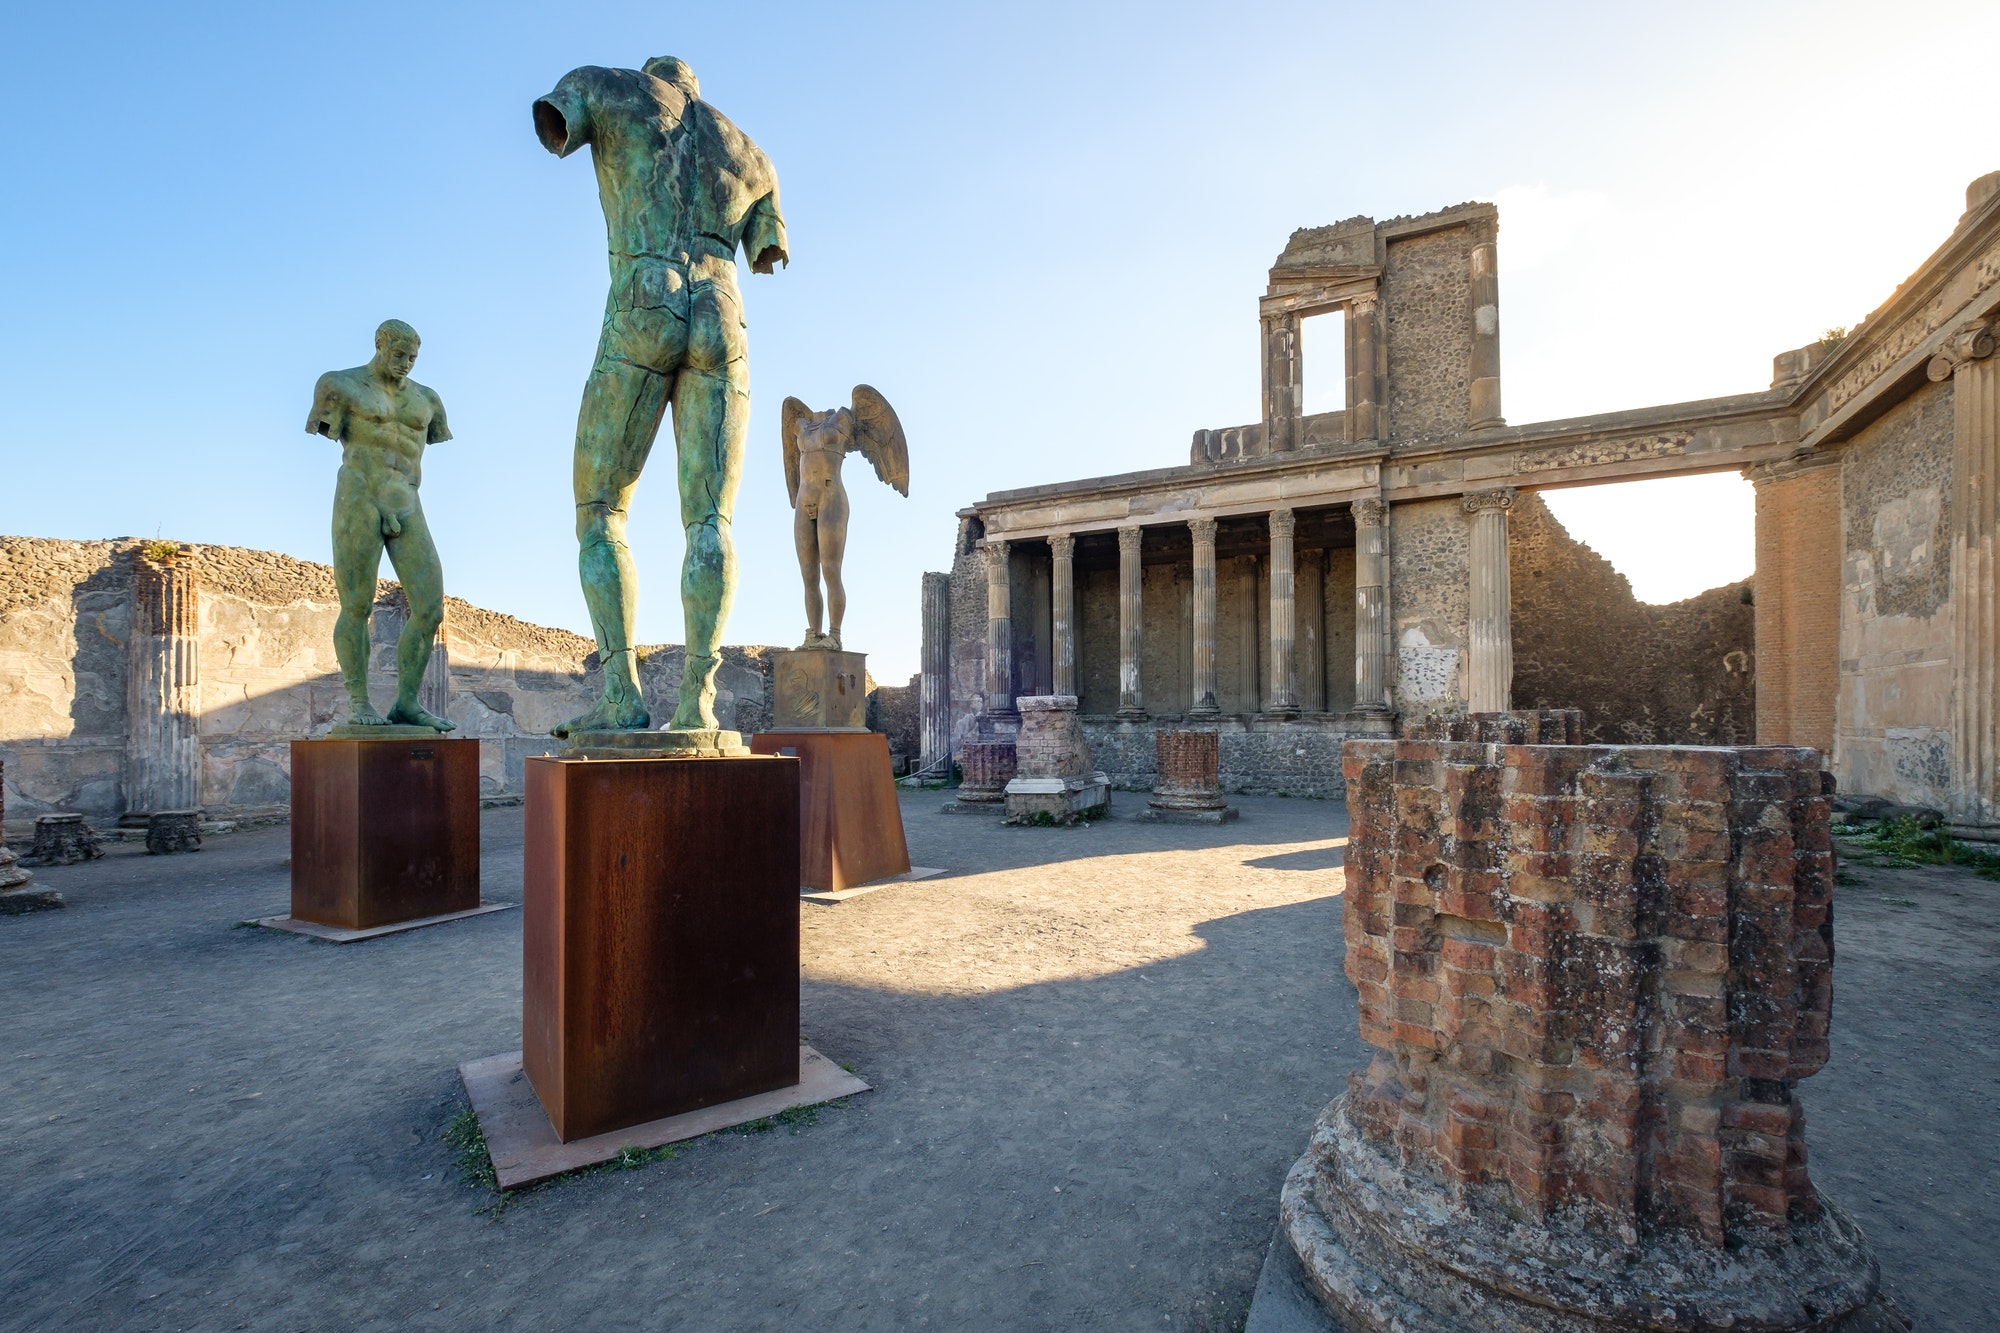 Scenic view of ruins and statues in ancient city of Pompeii